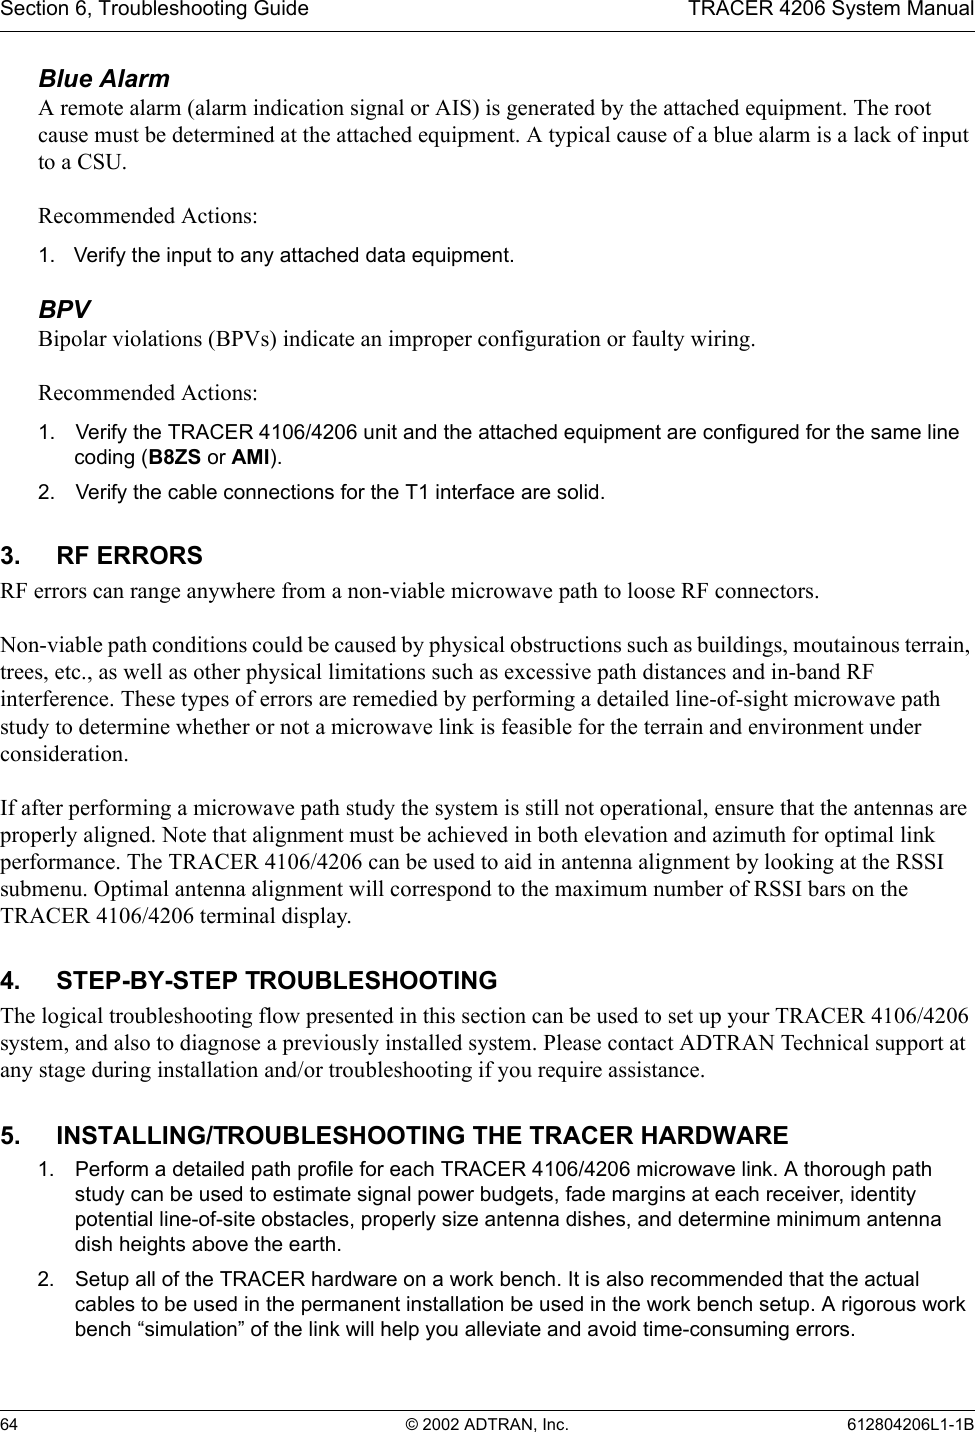 Section 6, Troubleshooting Guide TRACER 4206 System Manual64 © 2002 ADTRAN, Inc. 612804206L1-1BBlue Alarm A remote alarm (alarm indication signal or AIS) is generated by the attached equipment. The root cause must be determined at the attached equipment. A typical cause of a blue alarm is a lack of input to a CSU.Recommended Actions:1. Verify the input to any attached data equipment.BPVBipolar violations (BPVs) indicate an improper configuration or faulty wiring.Recommended Actions:1. Verify the TRACER 4106/4206 unit and the attached equipment are configured for the same line coding (B8ZS or AMI).2. Verify the cable connections for the T1 interface are solid.3. RF ERRORSRF errors can range anywhere from a non-viable microwave path to loose RF connectors.Non-viable path conditions could be caused by physical obstructions such as buildings, moutainous terrain, trees, etc., as well as other physical limitations such as excessive path distances and in-band RF interference. These types of errors are remedied by performing a detailed line-of-sight microwave path study to determine whether or not a microwave link is feasible for the terrain and environment under consideration.If after performing a microwave path study the system is still not operational, ensure that the antennas are properly aligned. Note that alignment must be achieved in both elevation and azimuth for optimal link performance. The TRACER 4106/4206 can be used to aid in antenna alignment by looking at the RSSI submenu. Optimal antenna alignment will correspond to the maximum number of RSSI bars on the TRACER 4106/4206 terminal display.4. STEP-BY-STEP TROUBLESHOOTINGThe logical troubleshooting flow presented in this section can be used to set up your TRACER 4106/4206 system, and also to diagnose a previously installed system. Please contact ADTRAN Technical support at any stage during installation and/or troubleshooting if you require assistance.5. INSTALLING/TROUBLESHOOTING THE TRACER HARDWARE1. Perform a detailed path profile for each TRACER 4106/4206 microwave link. A thorough path study can be used to estimate signal power budgets, fade margins at each receiver, identity potential line-of-site obstacles, properly size antenna dishes, and determine minimum antenna dish heights above the earth.2. Setup all of the TRACER hardware on a work bench. It is also recommended that the actual cables to be used in the permanent installation be used in the work bench setup. A rigorous work bench “simulation” of the link will help you alleviate and avoid time-consuming errors.